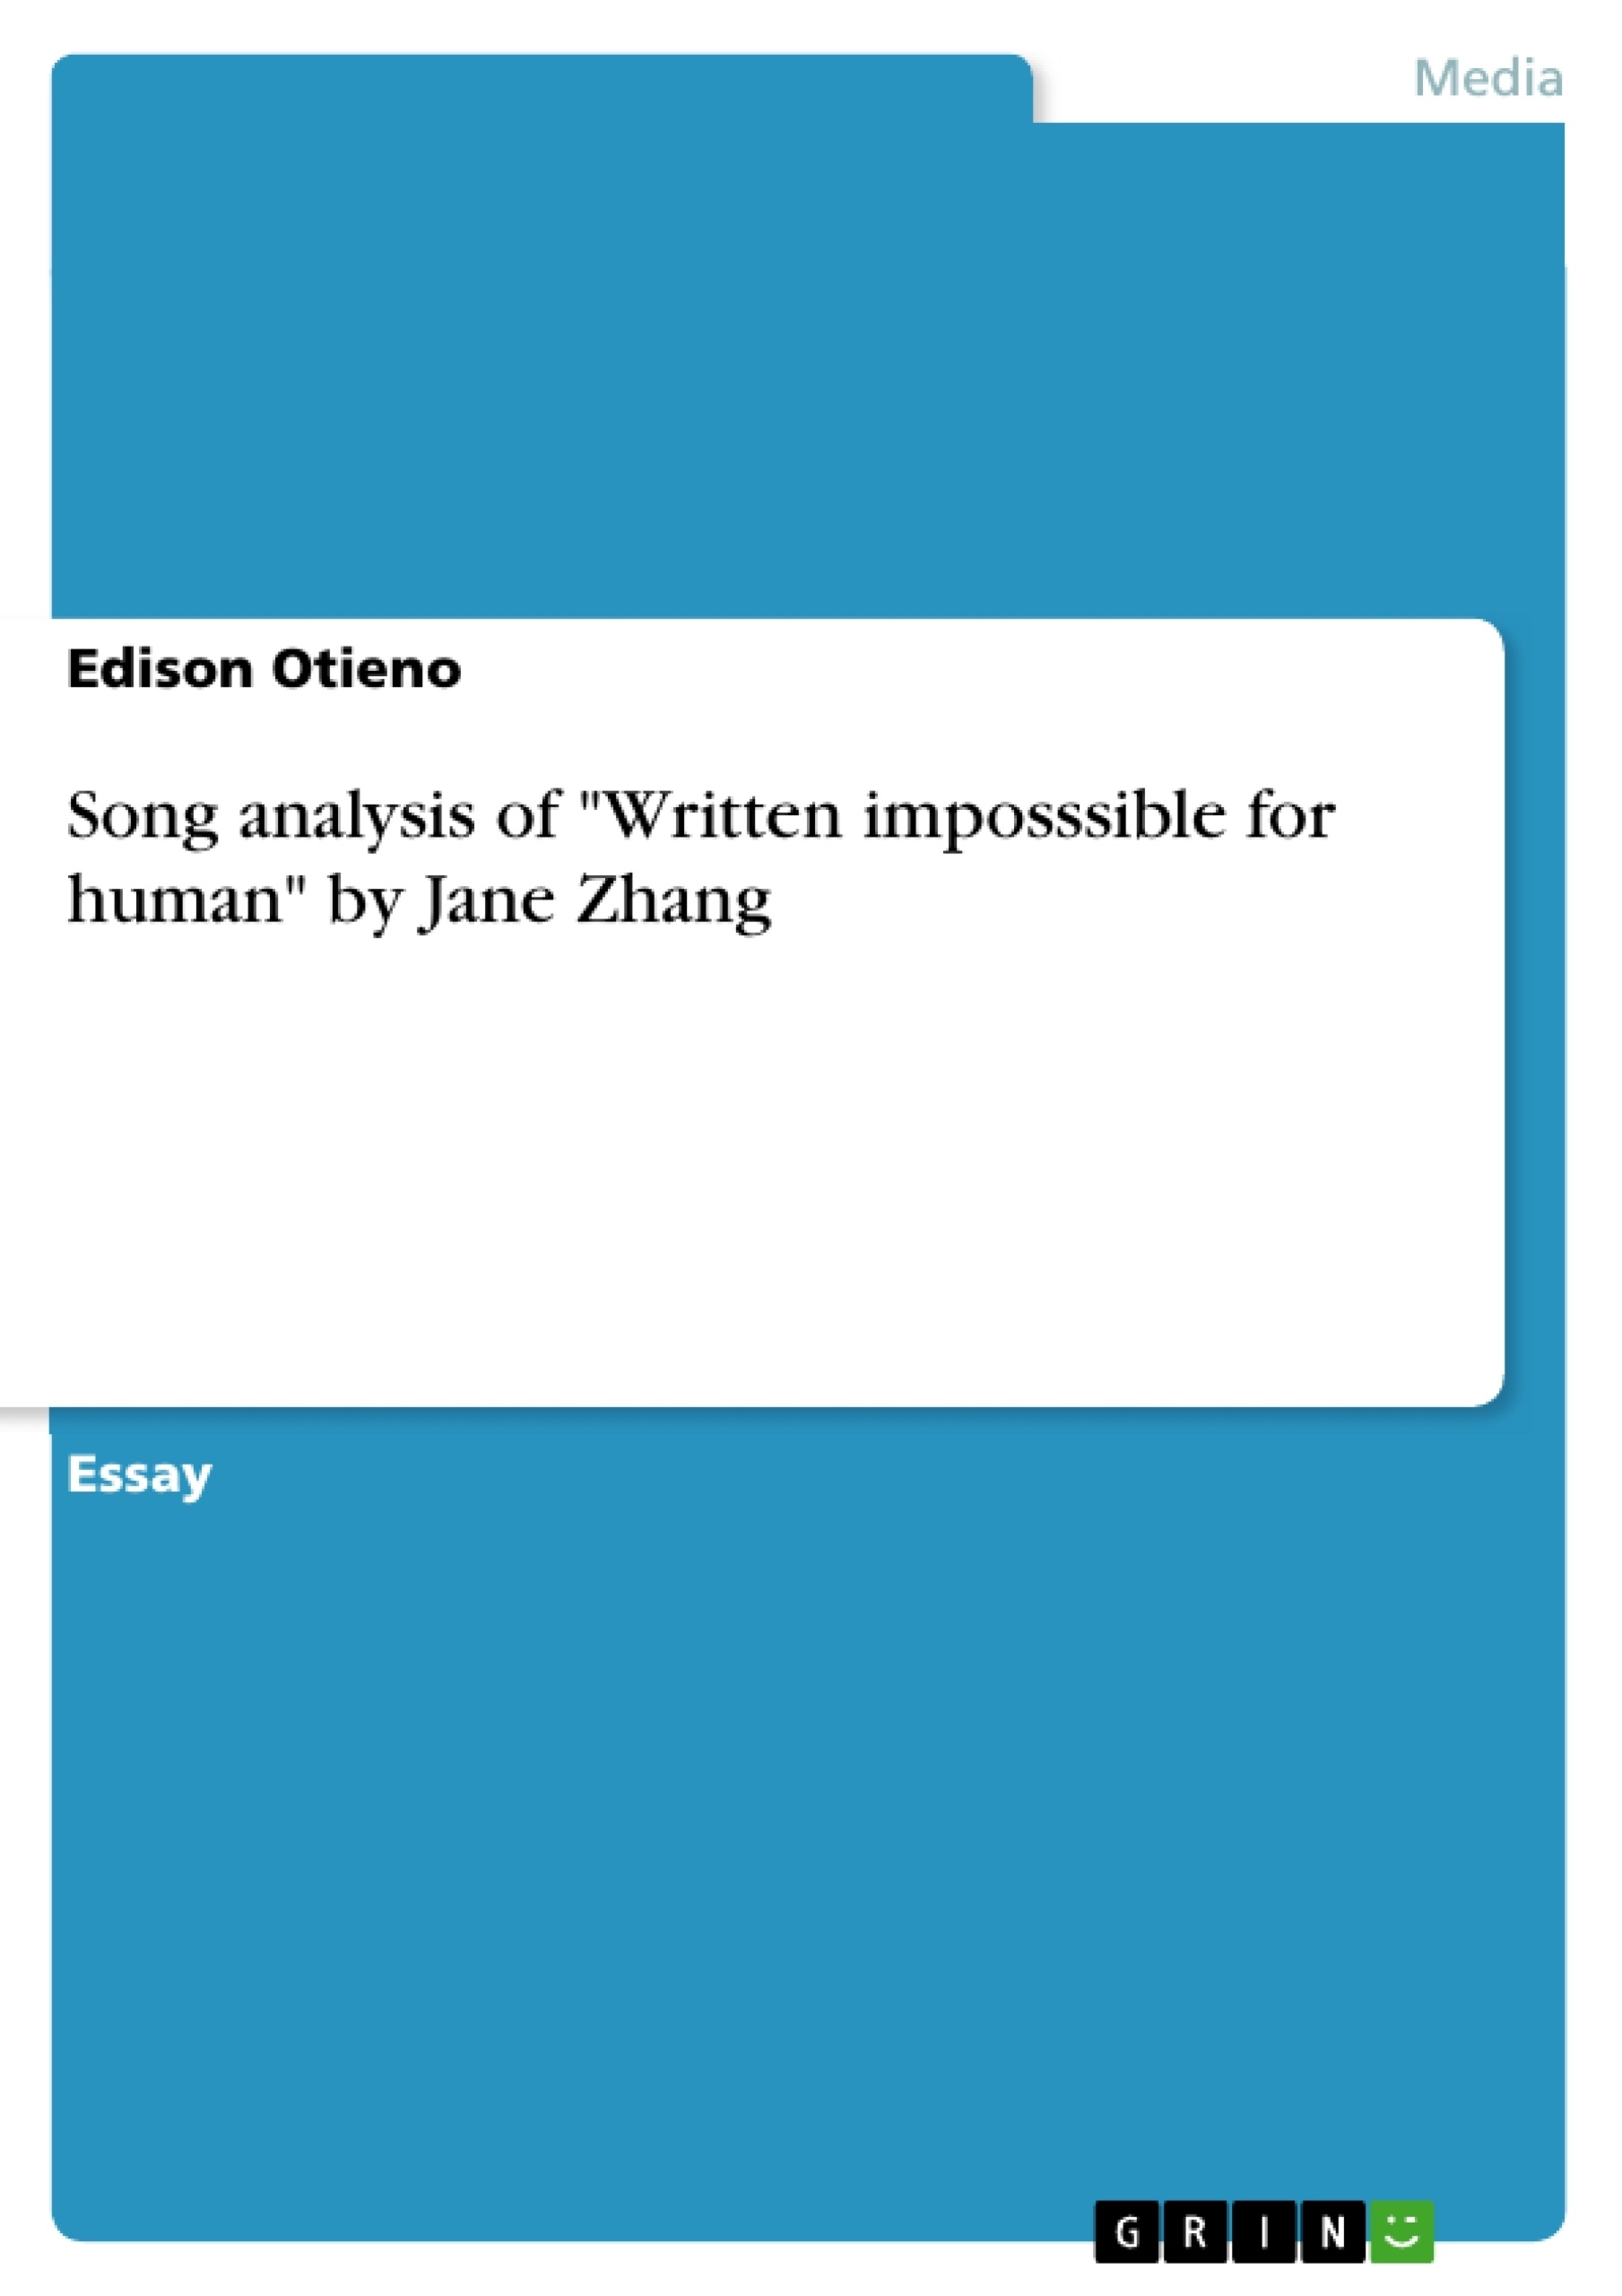 Titel: Song analysis of "Written imposssible for human" by Jane Zhang